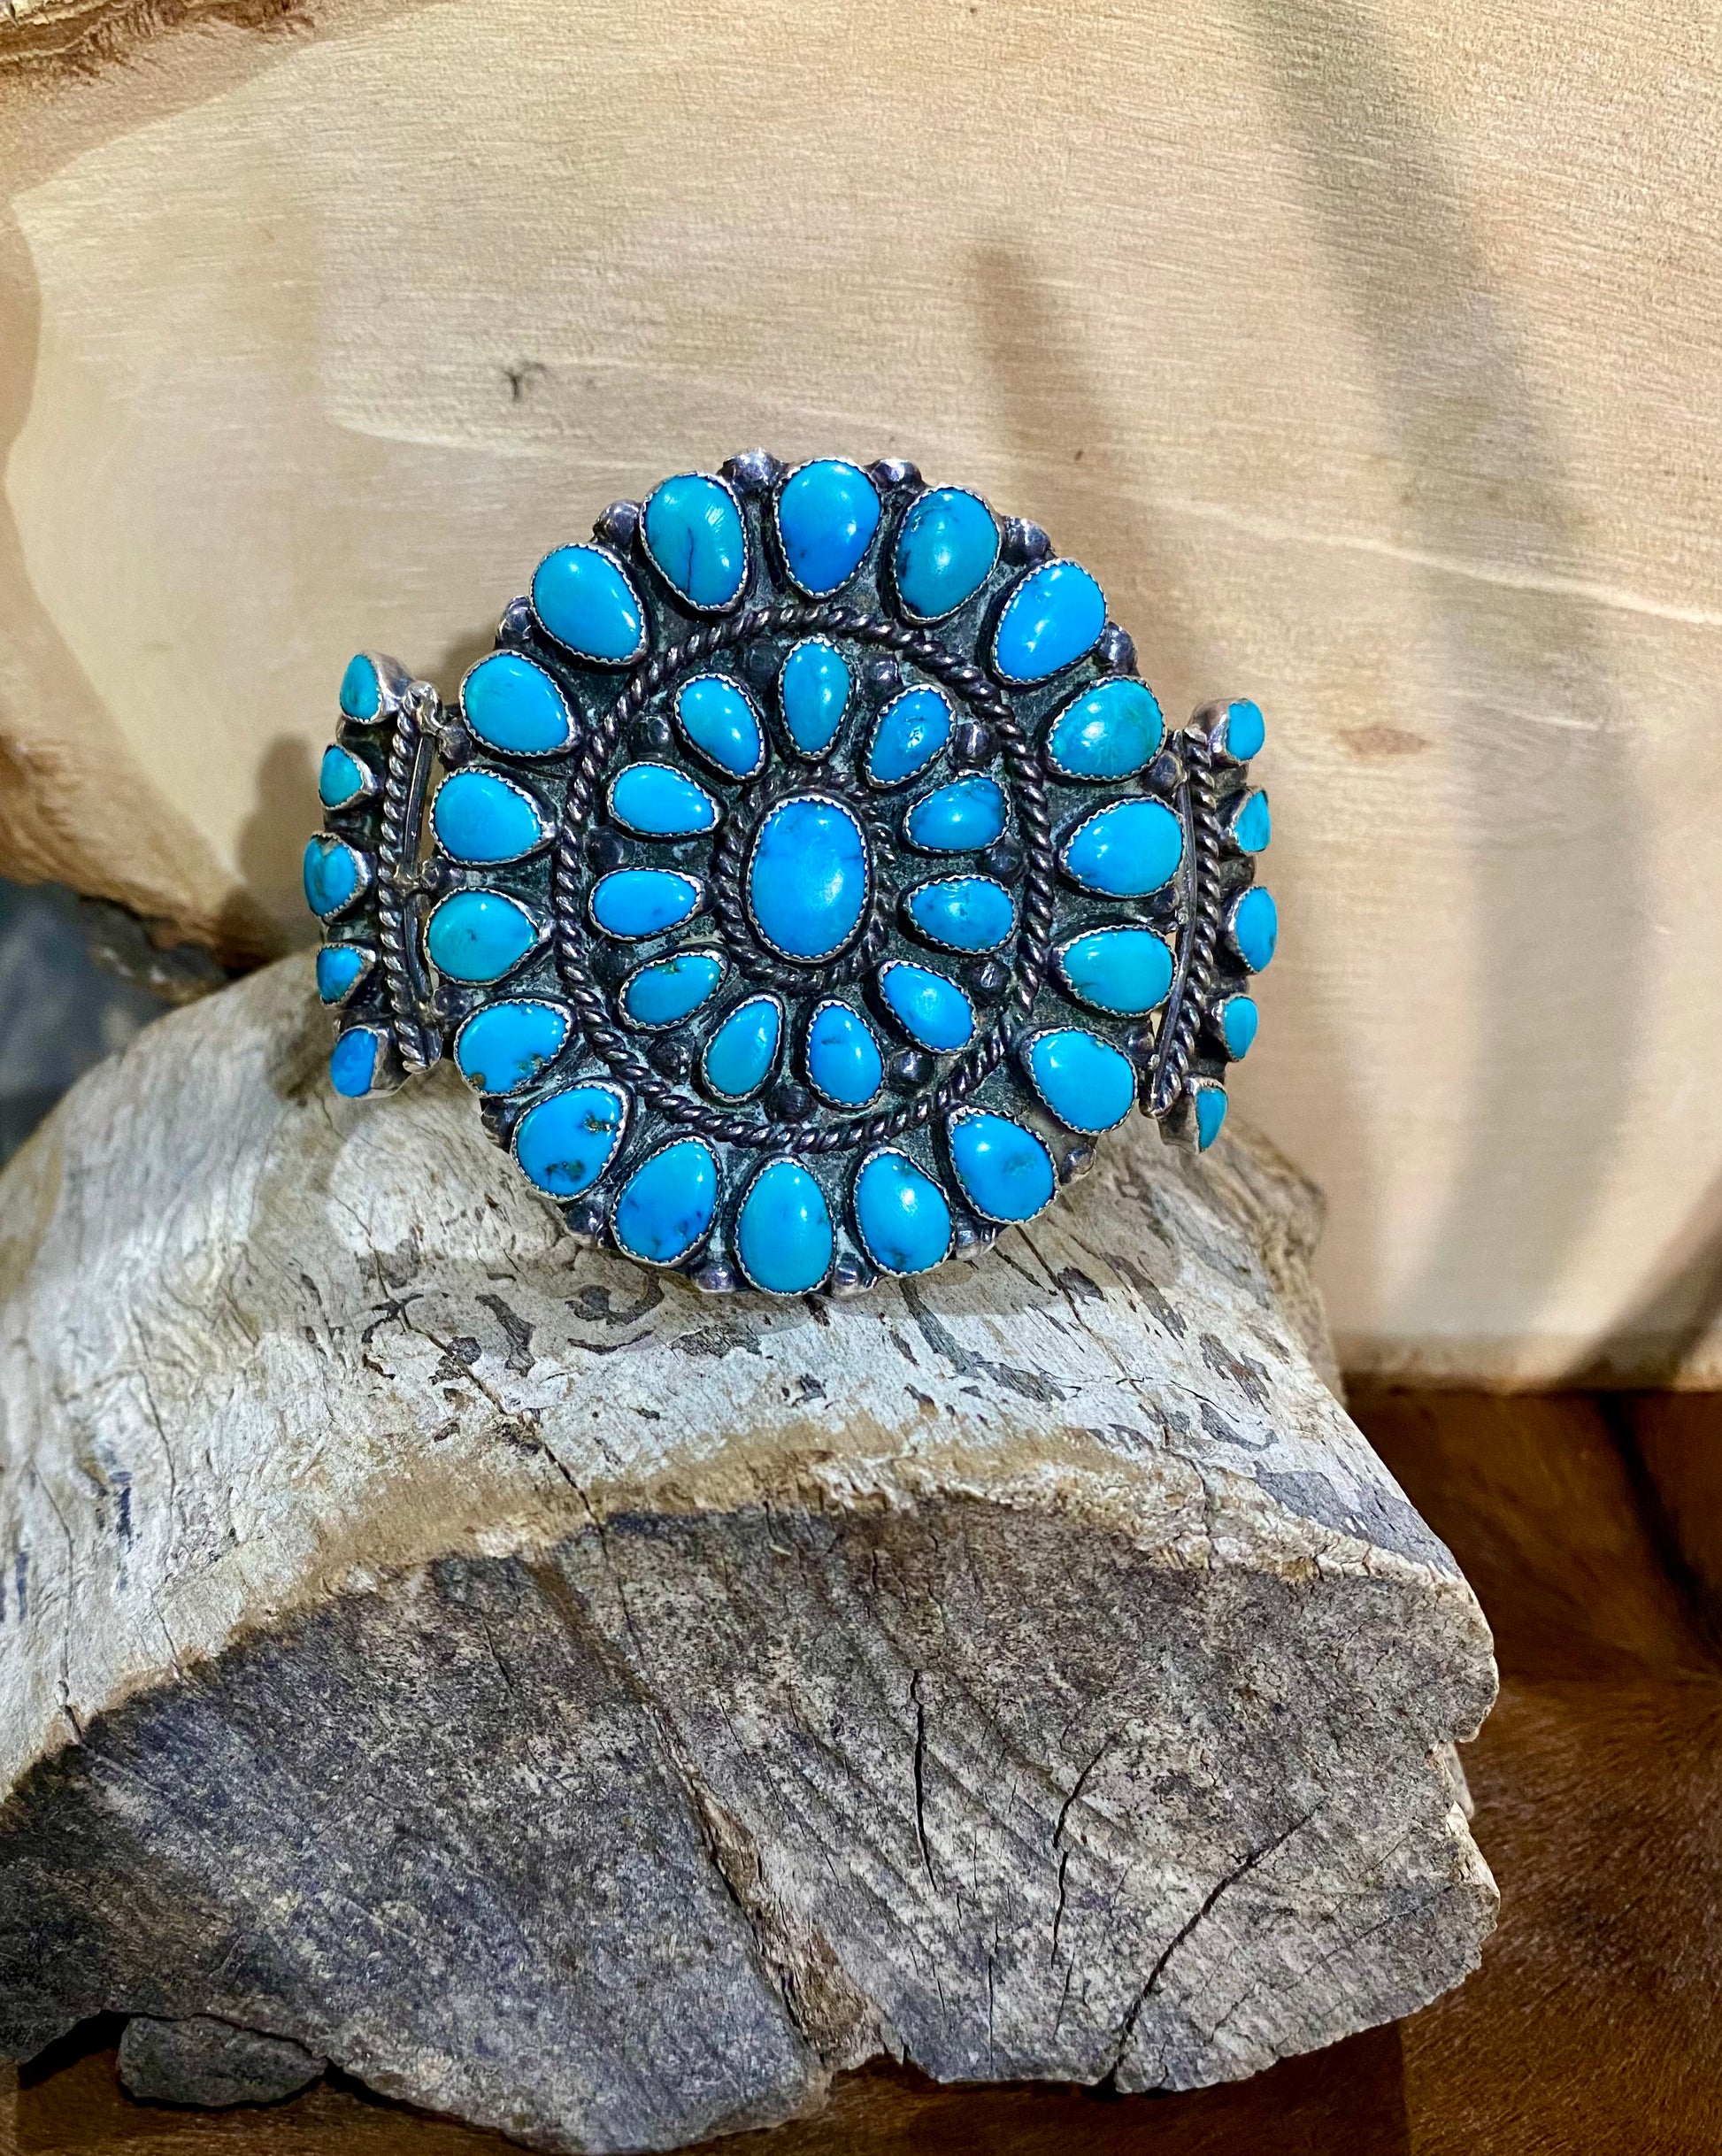 Immaculate turquoise sterling silver cluster cuff. 6” inch length inside measurements plus 1.25” inch gap. Center stone area is 2.25” inch length. Beautiful turquoise cluster cuff, the perfect addition to anyone's jewelry collection. The perfect statement piece to add to any outfit. 